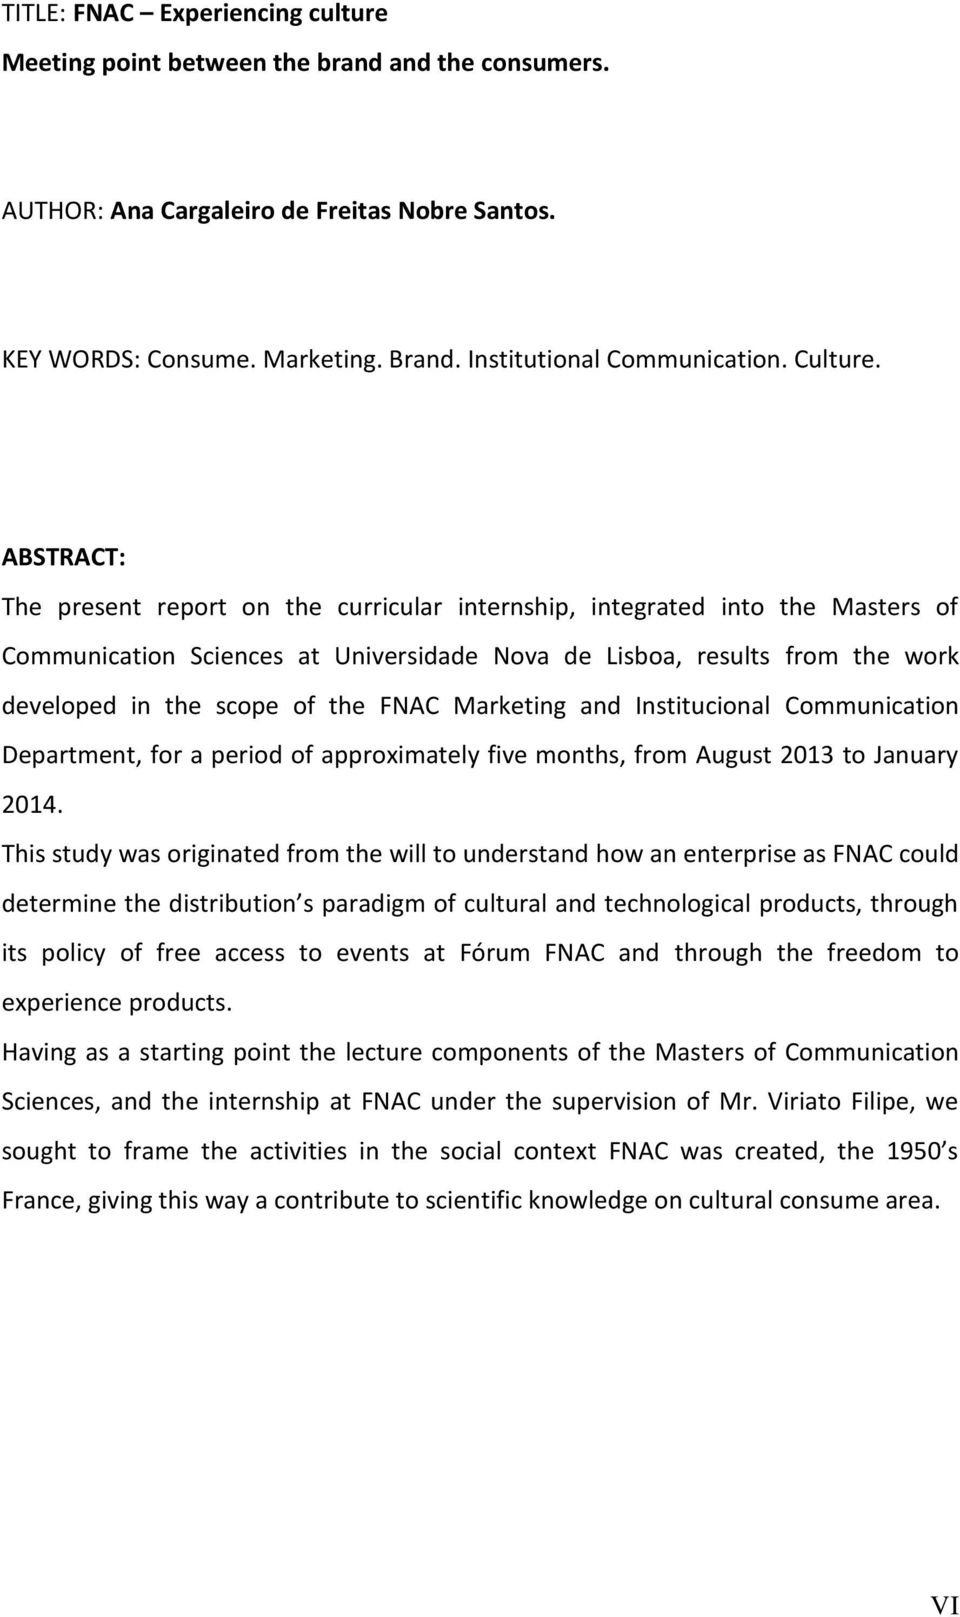 ABSTRACT: The present report on the curricular internship, integrated into the Masters of Communication Sciences at Universidade Nova de Lisboa, results from the work developed in the scope of the